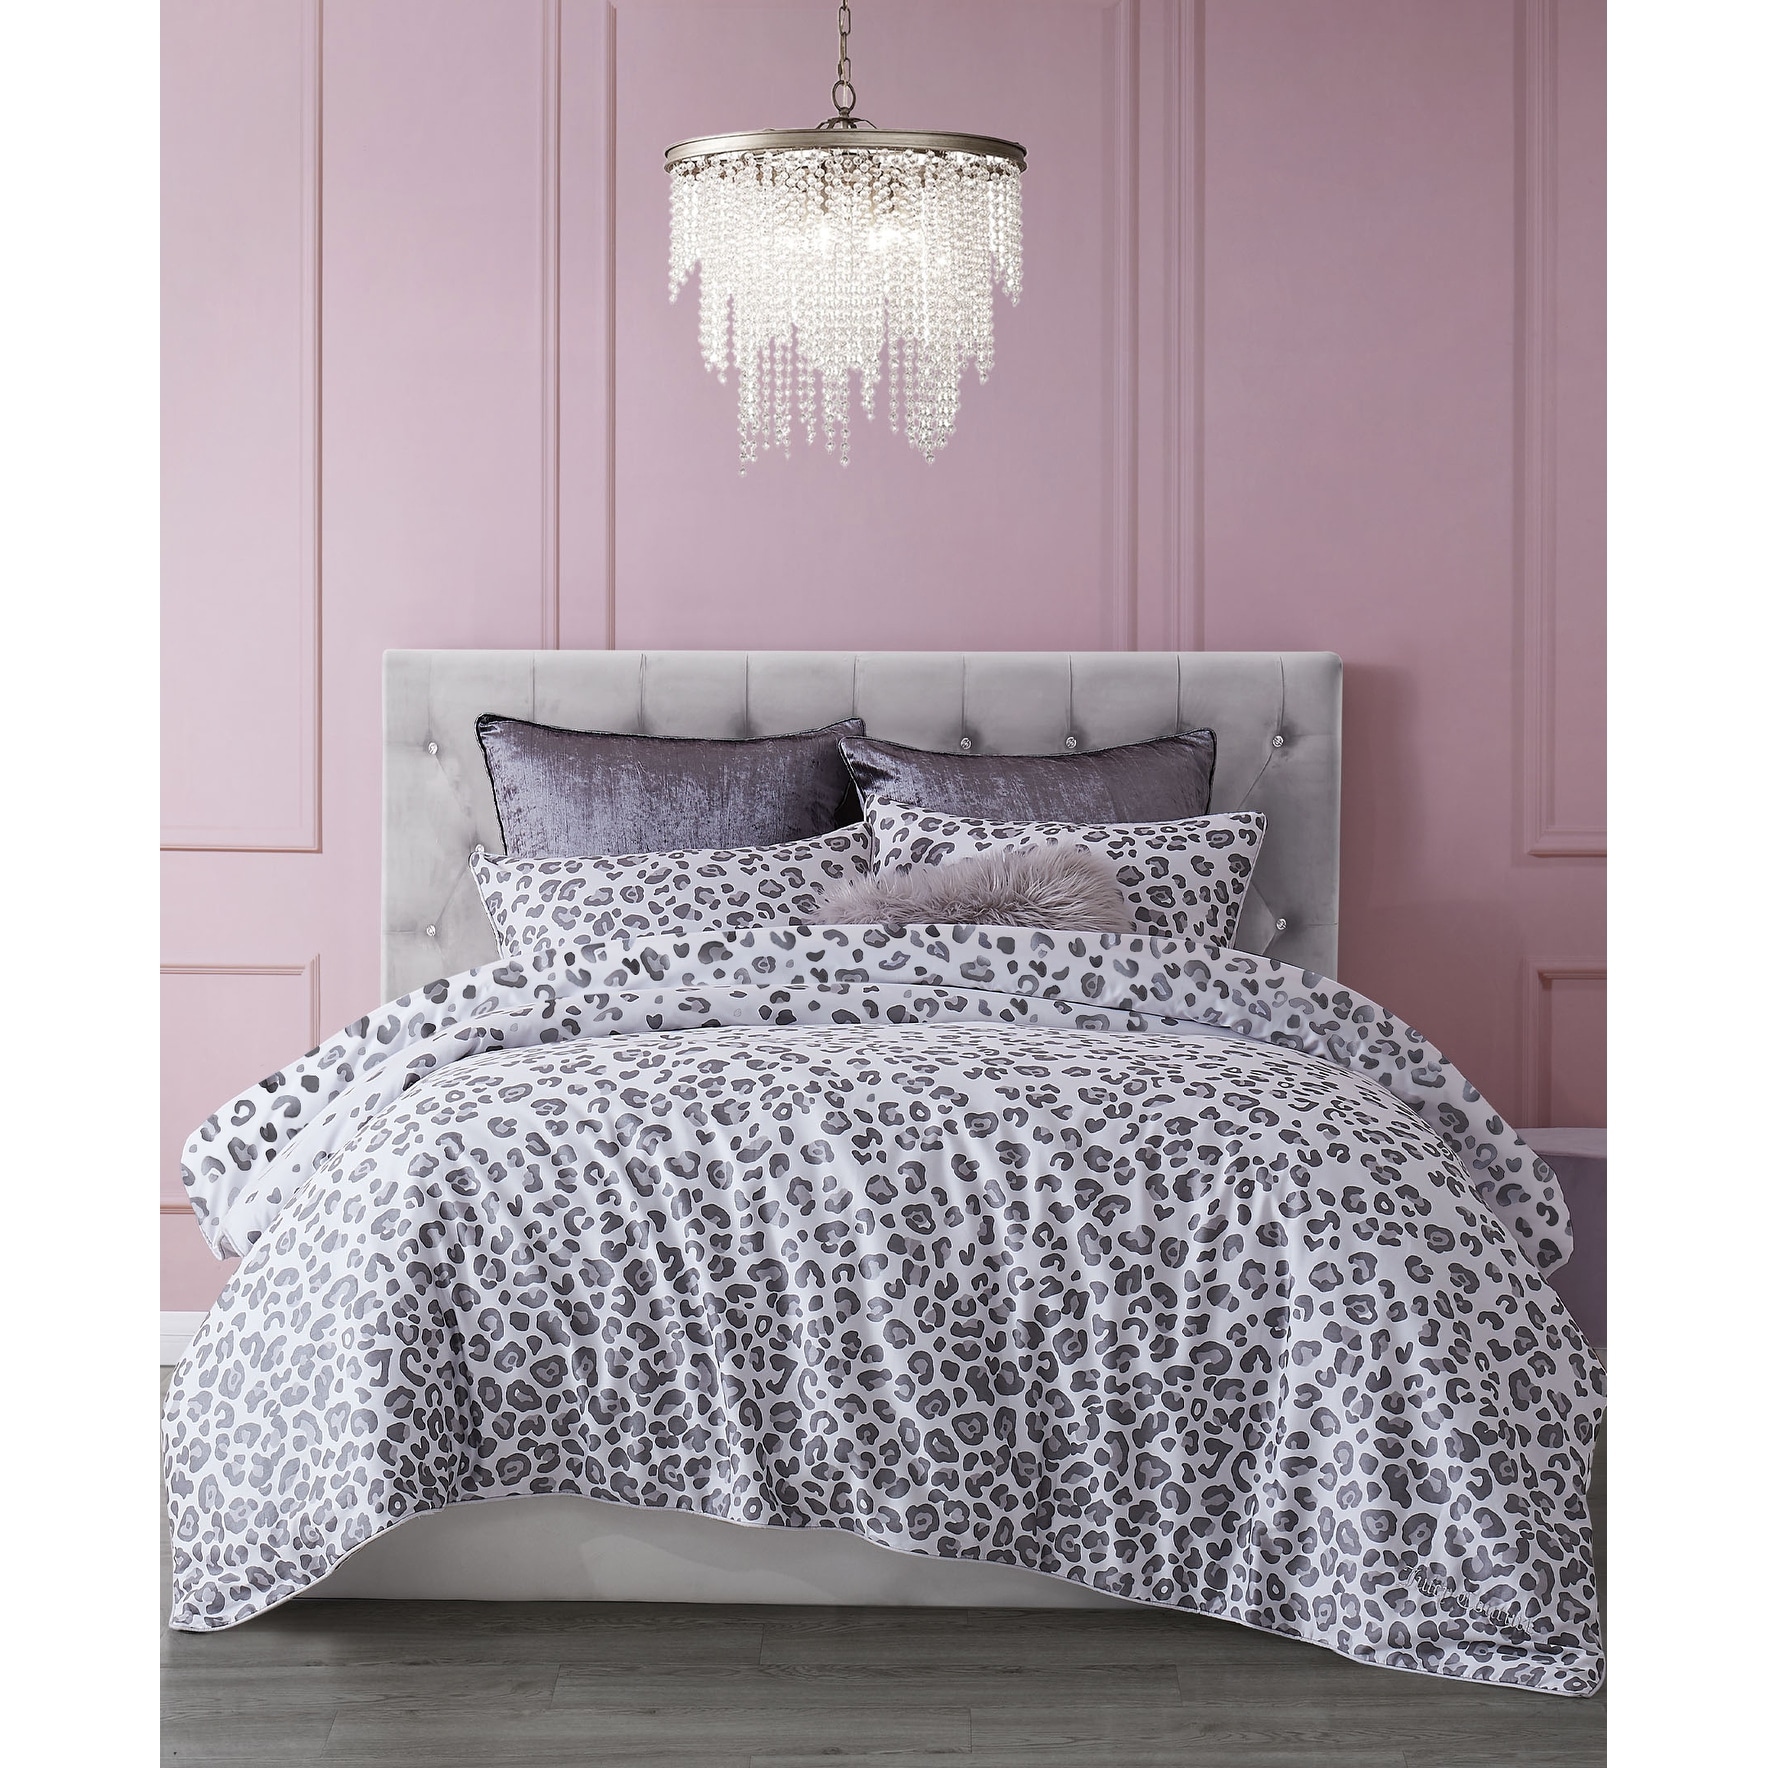 Juicy Couture Pearl Leopard Comforter Sets, Grey - On Sale - Bed